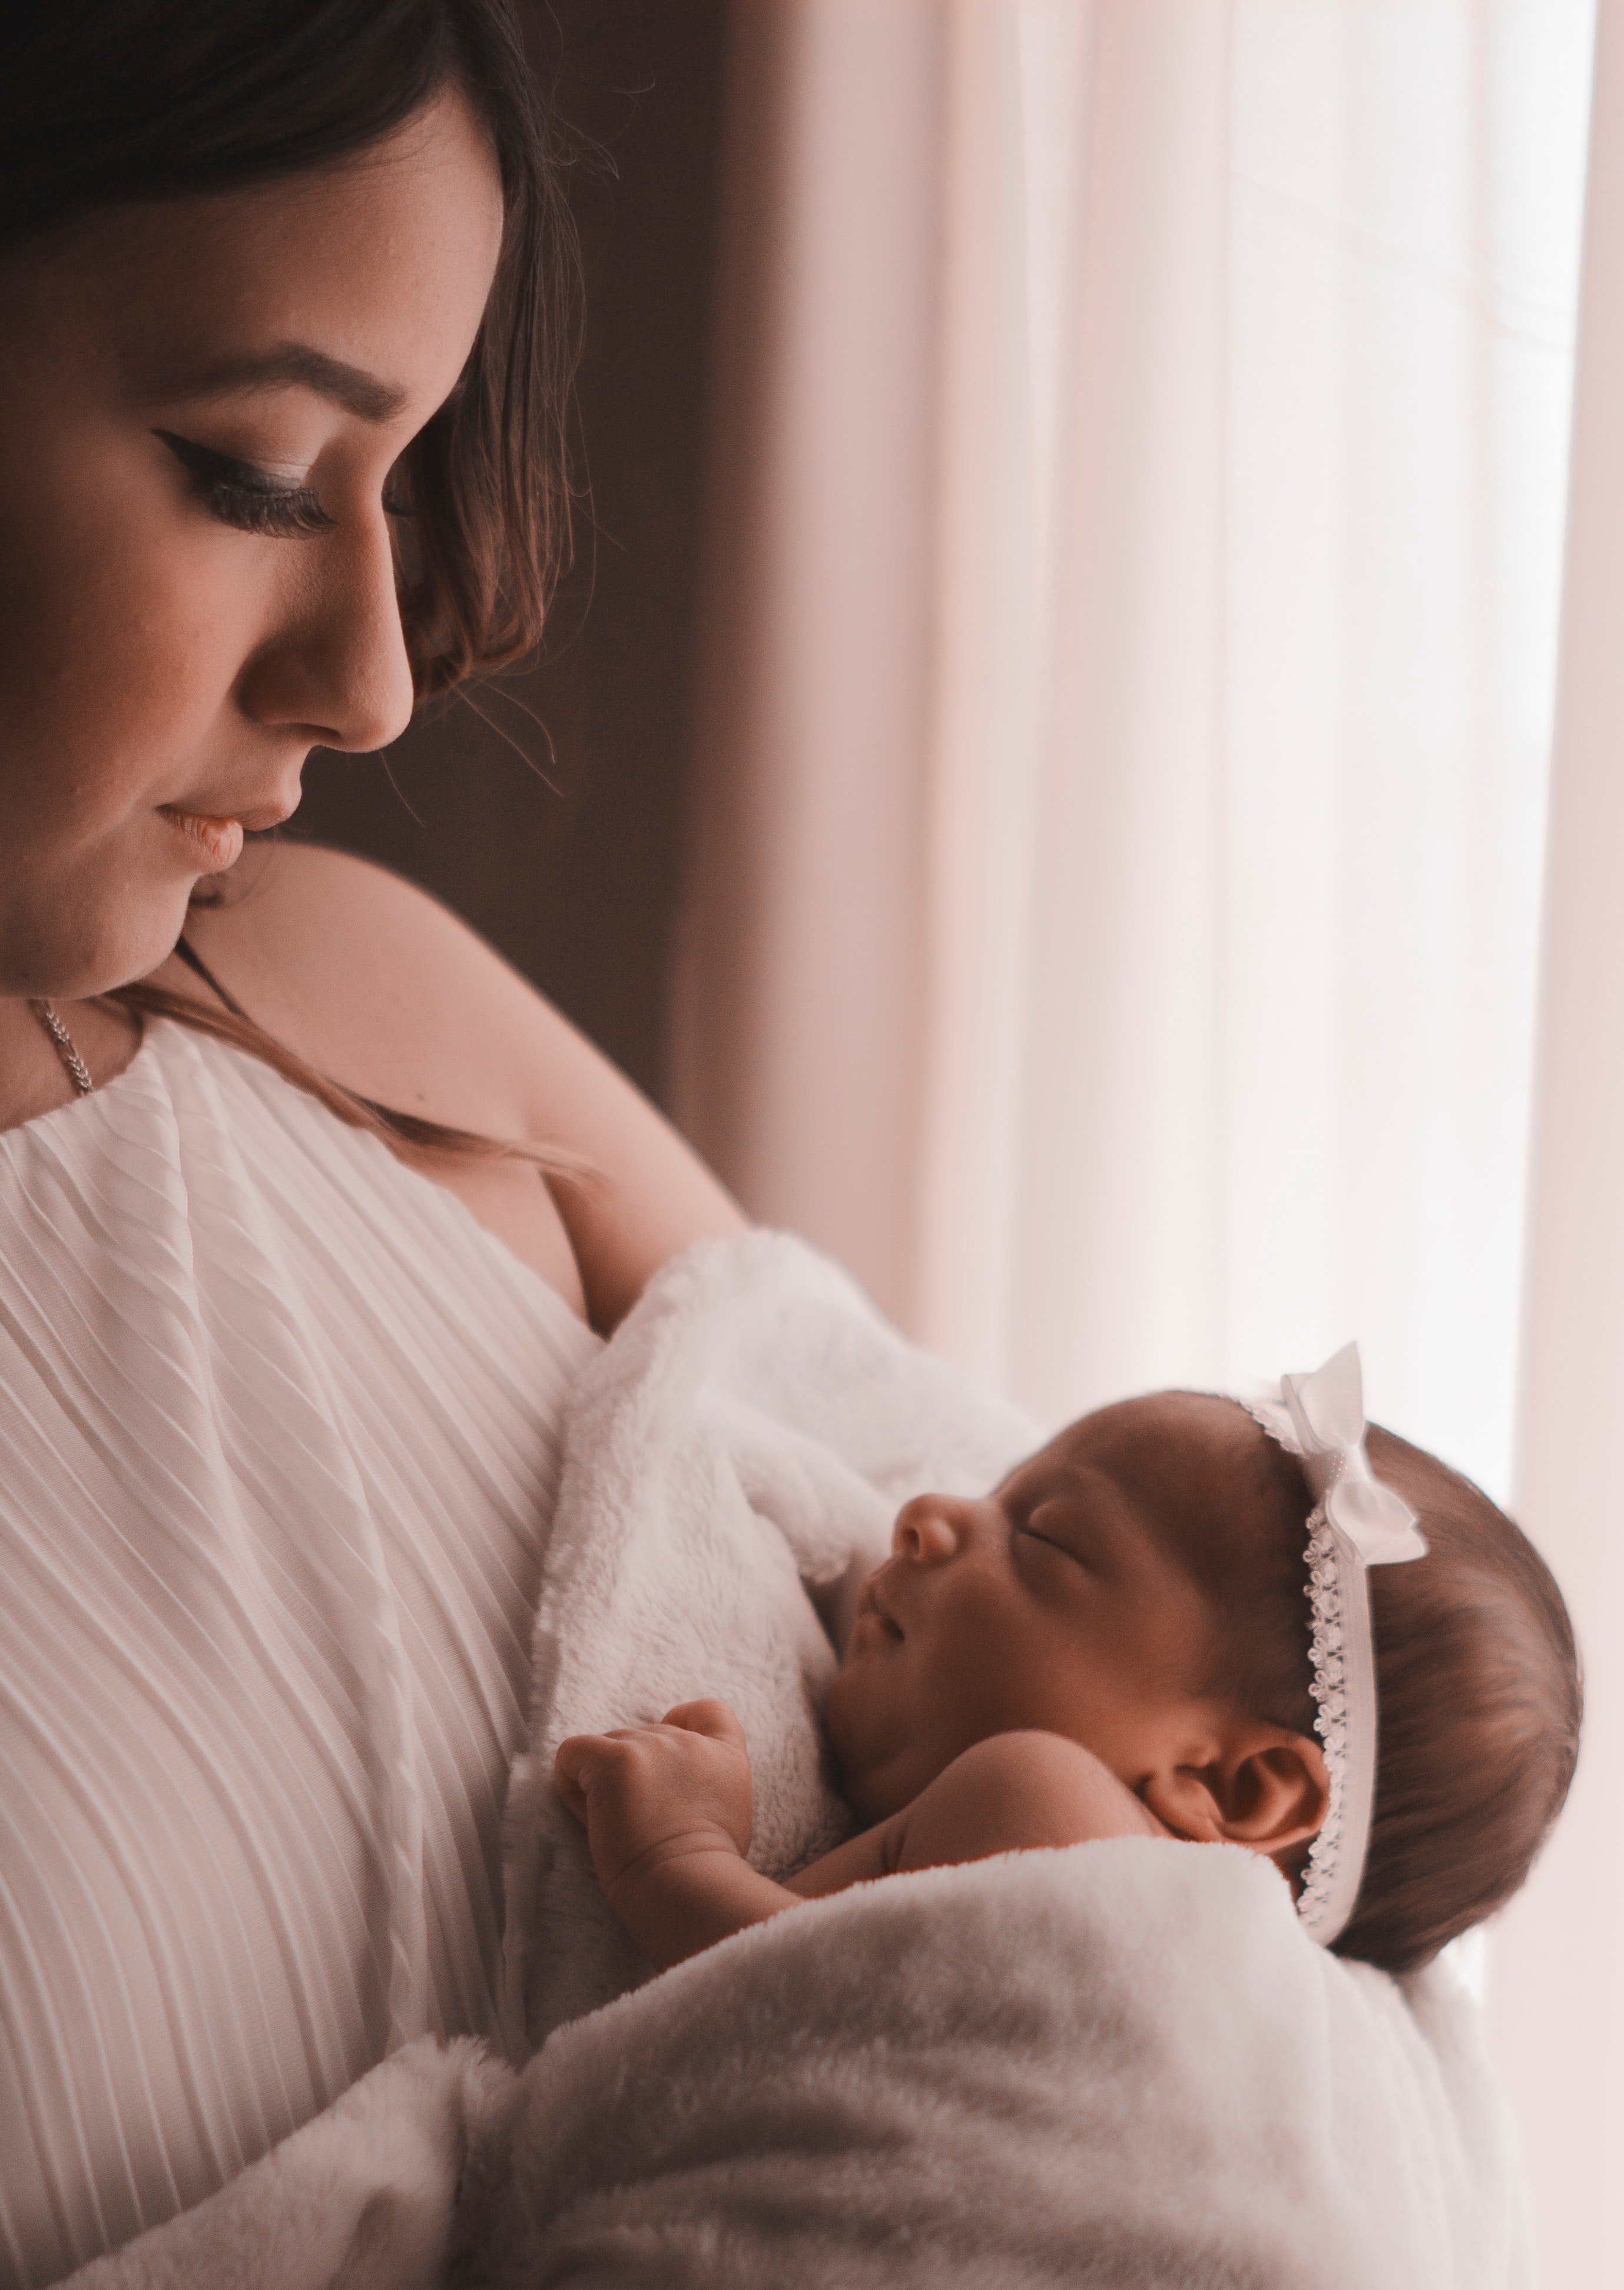 A recent mother holding her newborn and looking at the baby with affection. I Photo: Pexels.